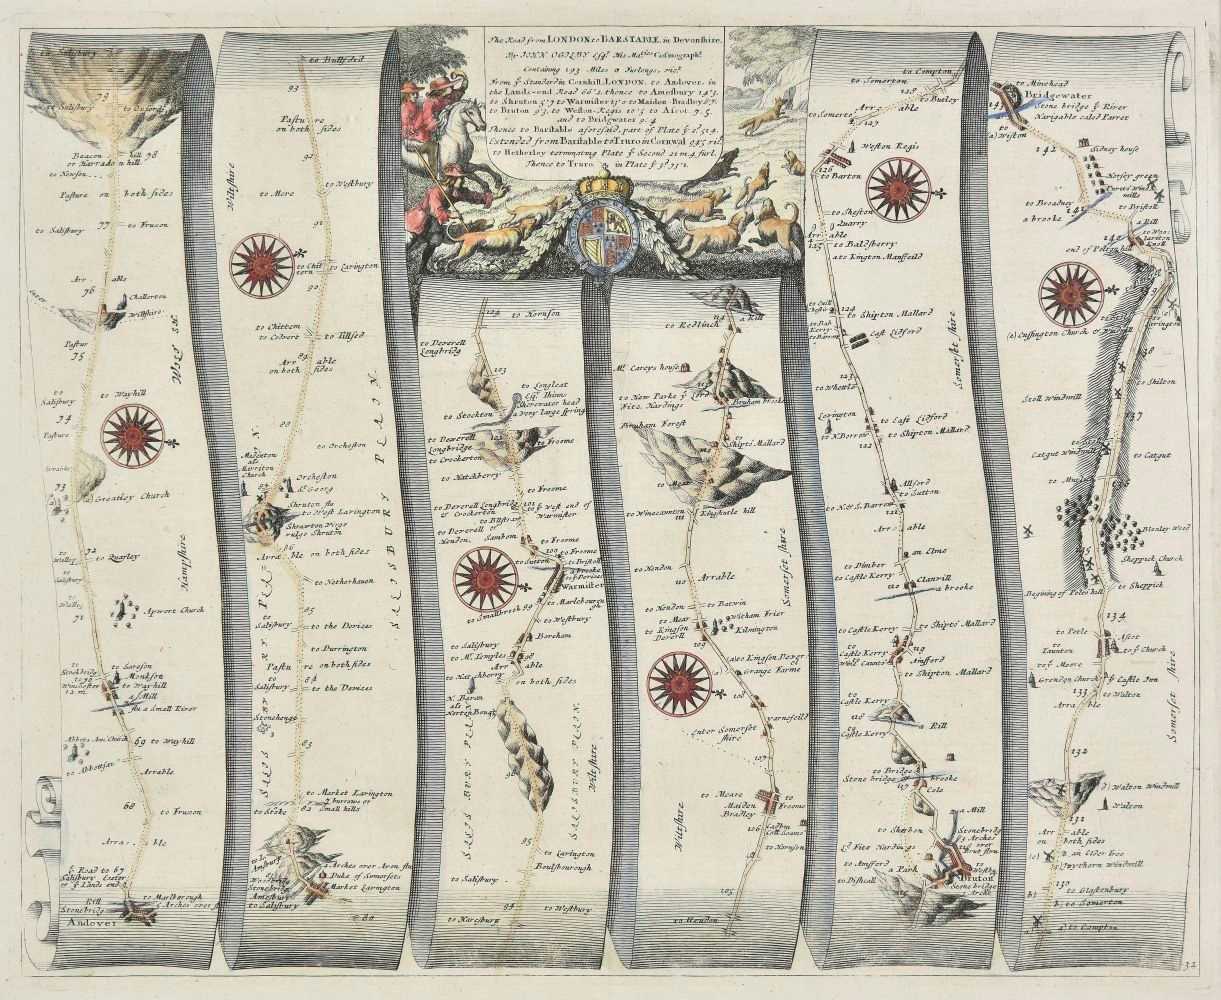 Lot 60 - Ogilby (John). The road from London to Barstable in Devonshire..., 1676 or later